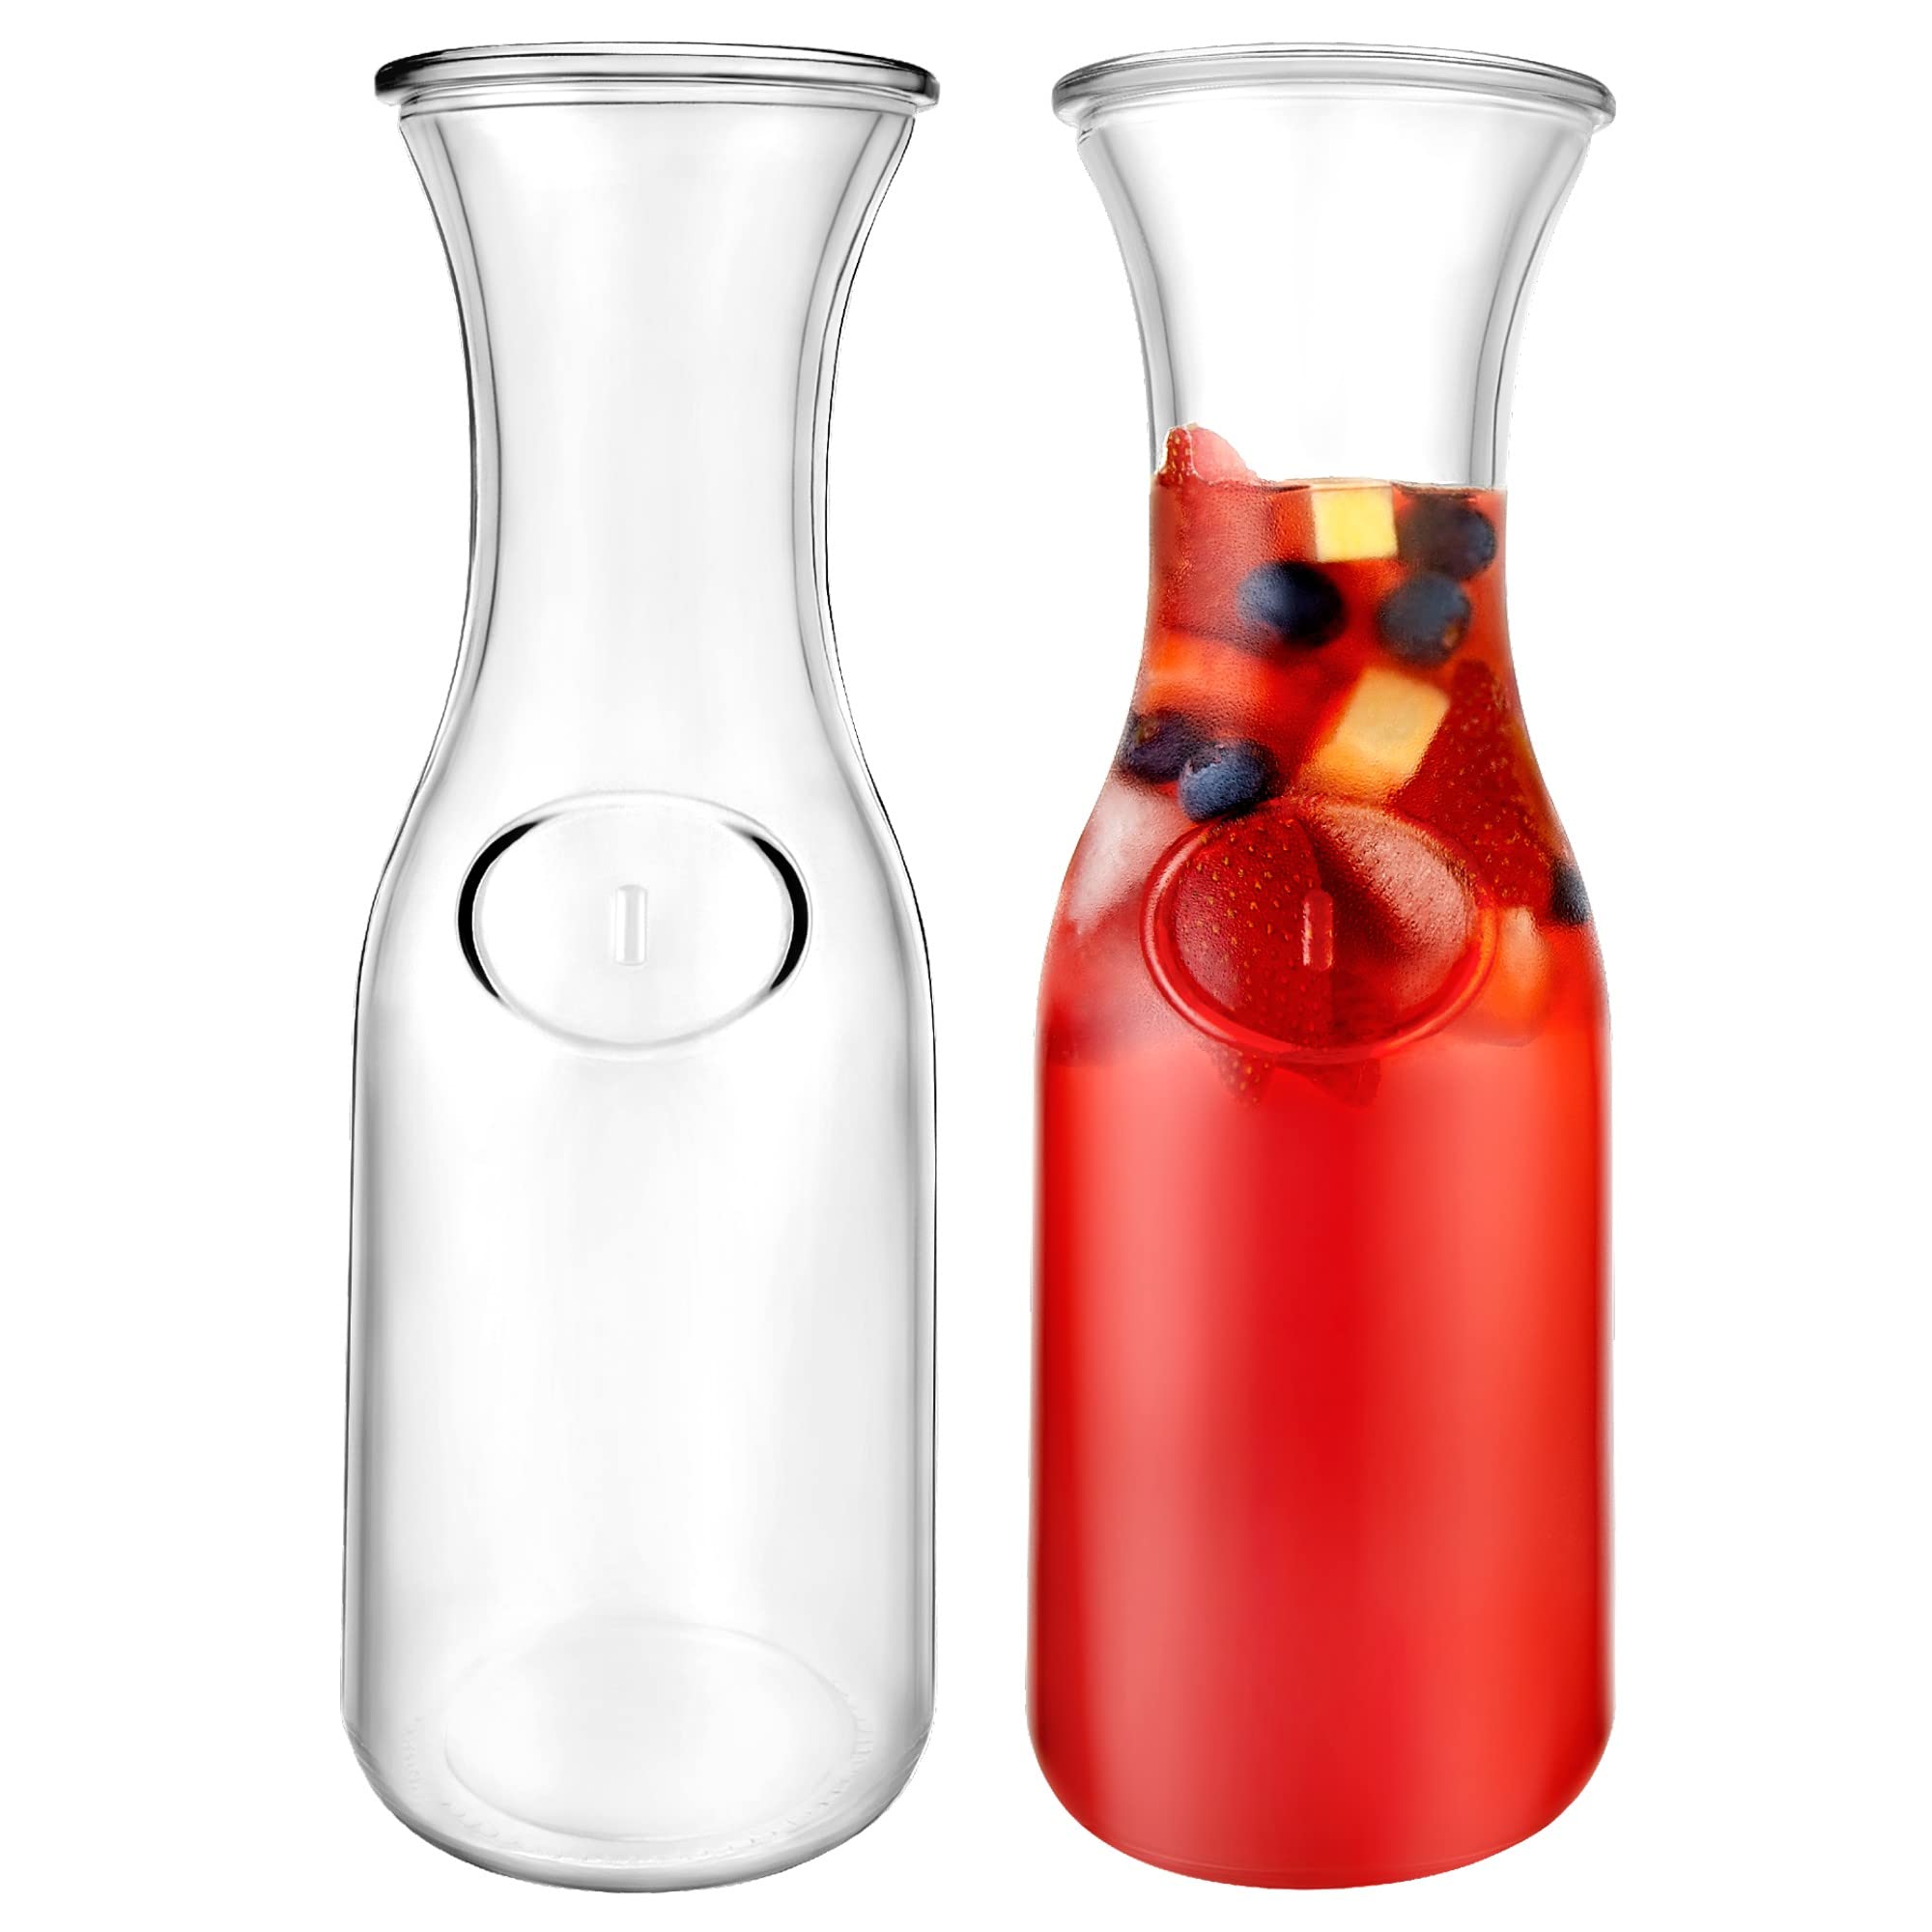 1 Liter Glass Carafe - Elegant Wine Decanter and Drink Pitcher - Narrow Neck For Comfortable Grip, Wide Mouth For Easy Pouring - Great for Parties and Events – Kitchen Lux  - Like New